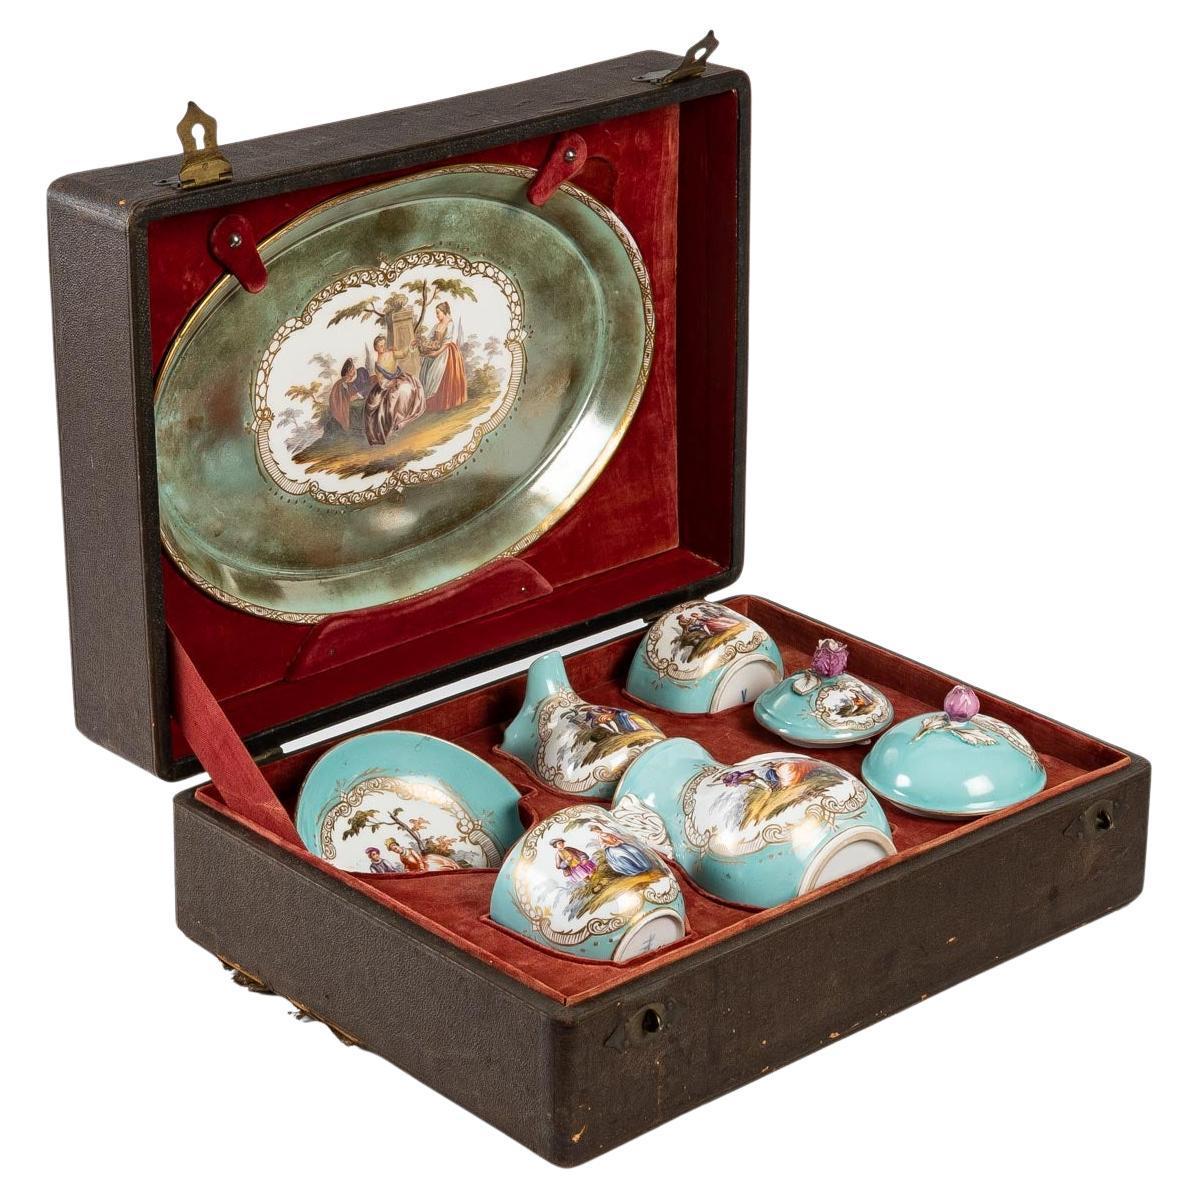 Porcelain service and its Meissen tray, 19th century

Porcelain service and its Meissen tray in its box composed of a cup, sugar bowl, milk jug, teapot and tray, 19th century, Napoleon III period.

Box - H: 15 cm, W: 37 cm, D: 26 cm

 